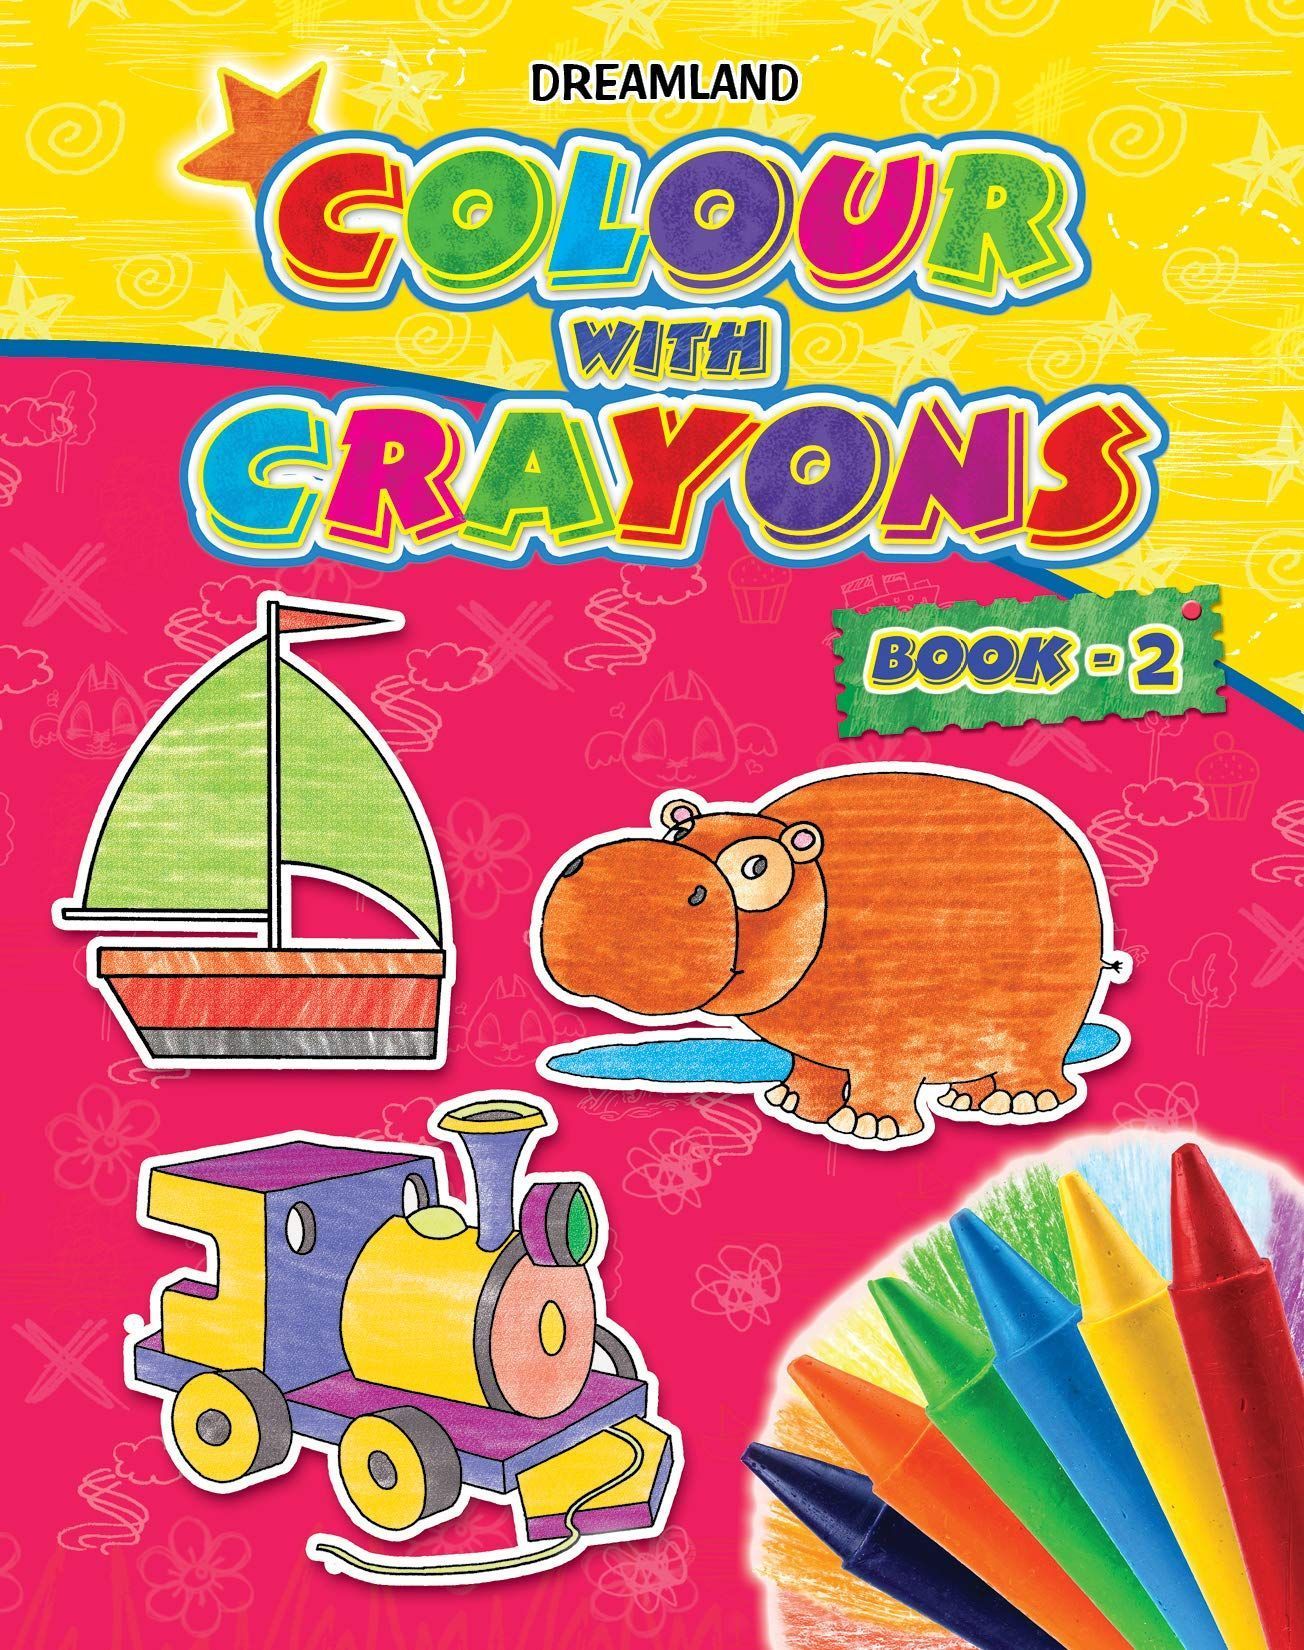 Colour With Crayons Book 2 for Kids Age 1 -6 Years - Drawing and Colouring Book for Early Learners [Paperback] Dreamland Publications